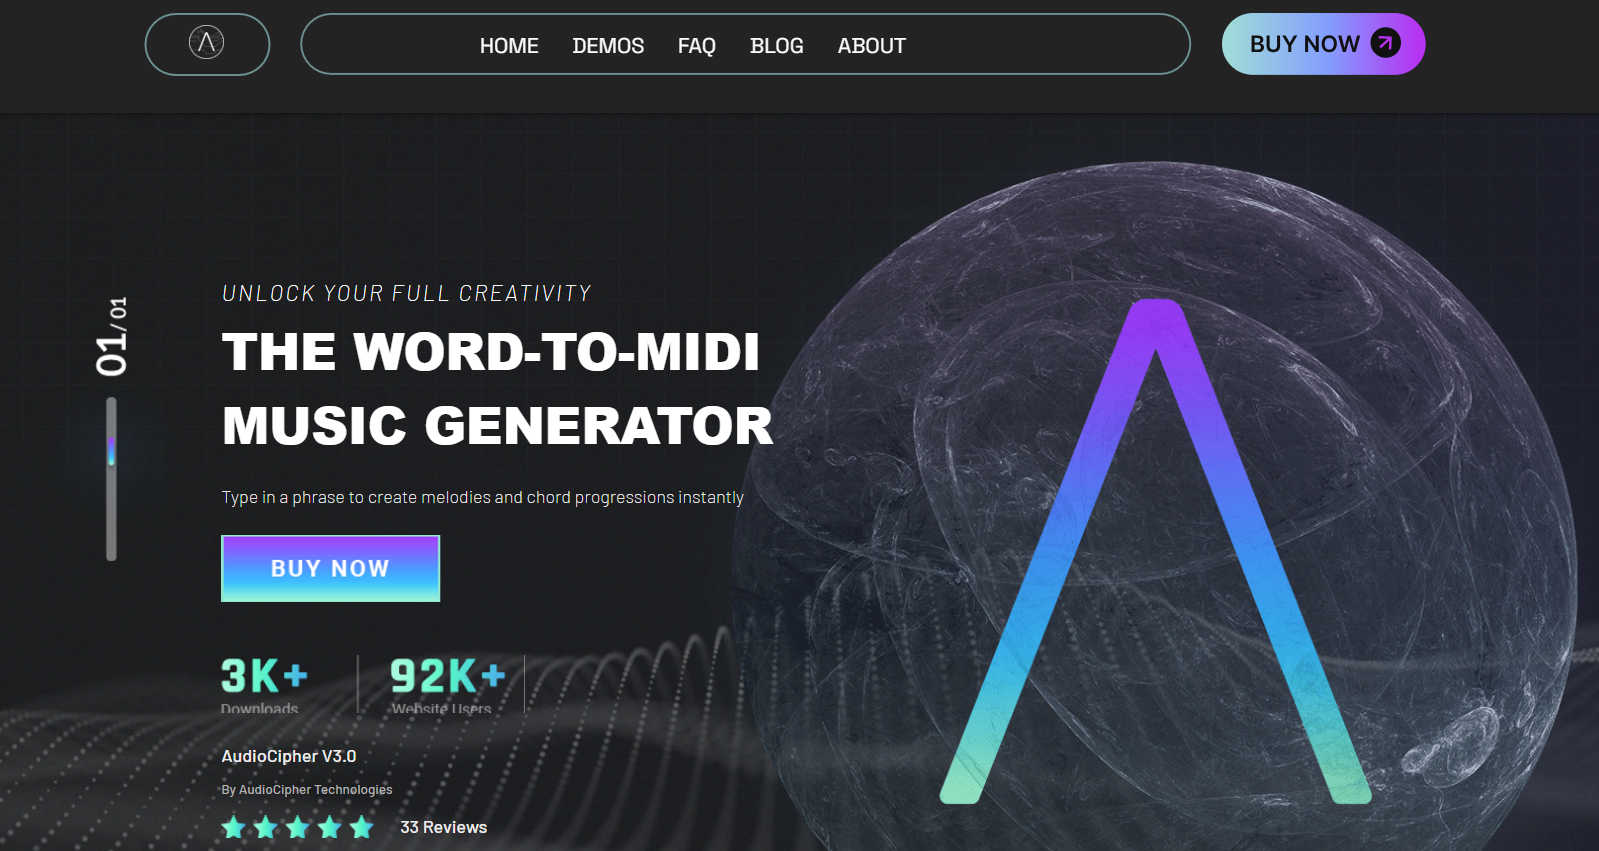 The heading reads "The word-to-MIDI music generator" and boasts beneath that the have over 3000 downloads and over 92,000 website users.